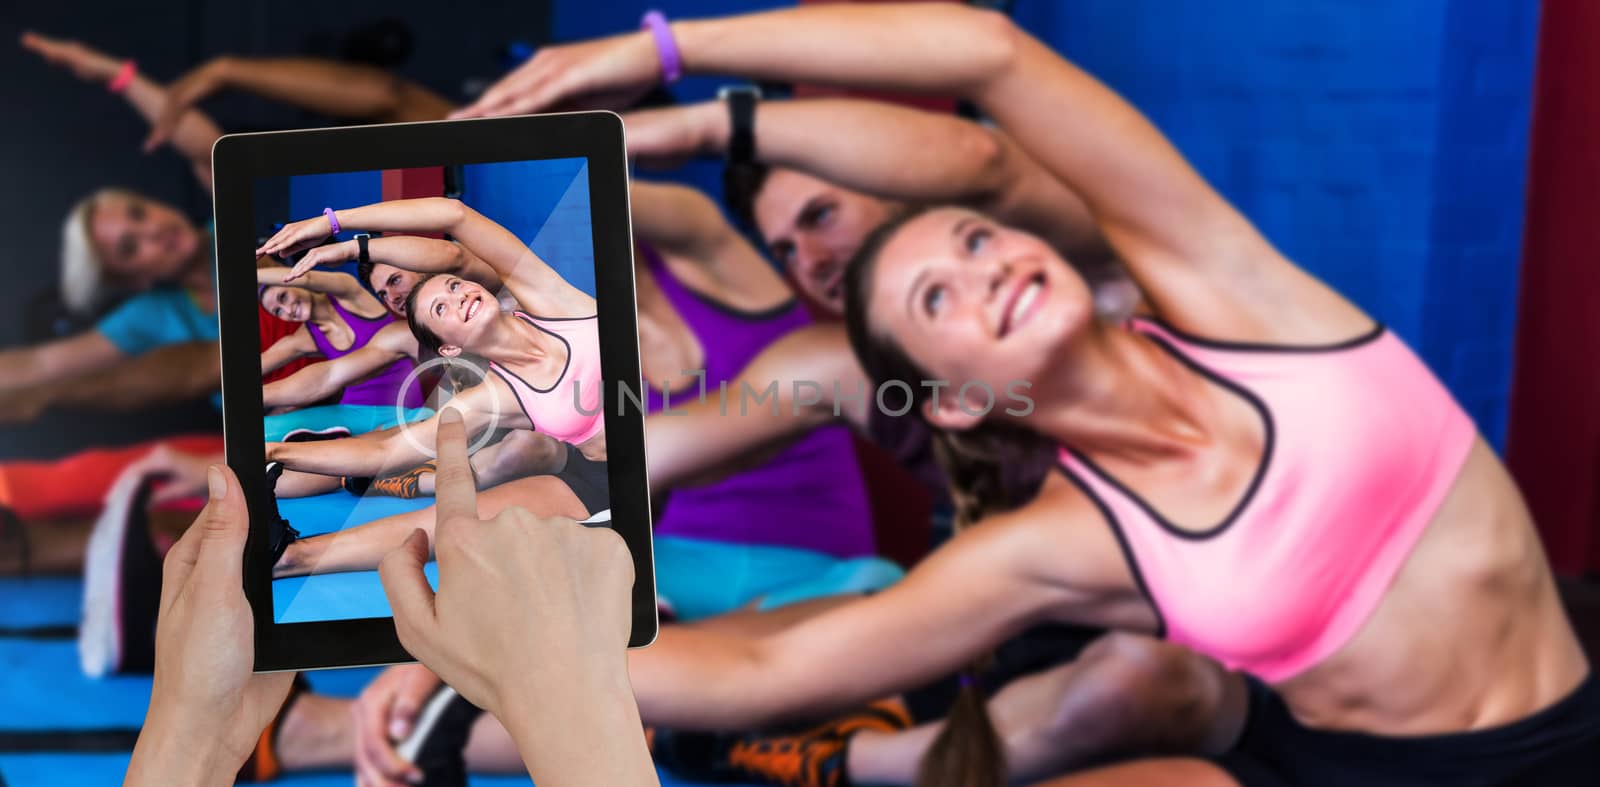 Hands touching digital tablet against white background against smiling people doing stretching exercise in gym